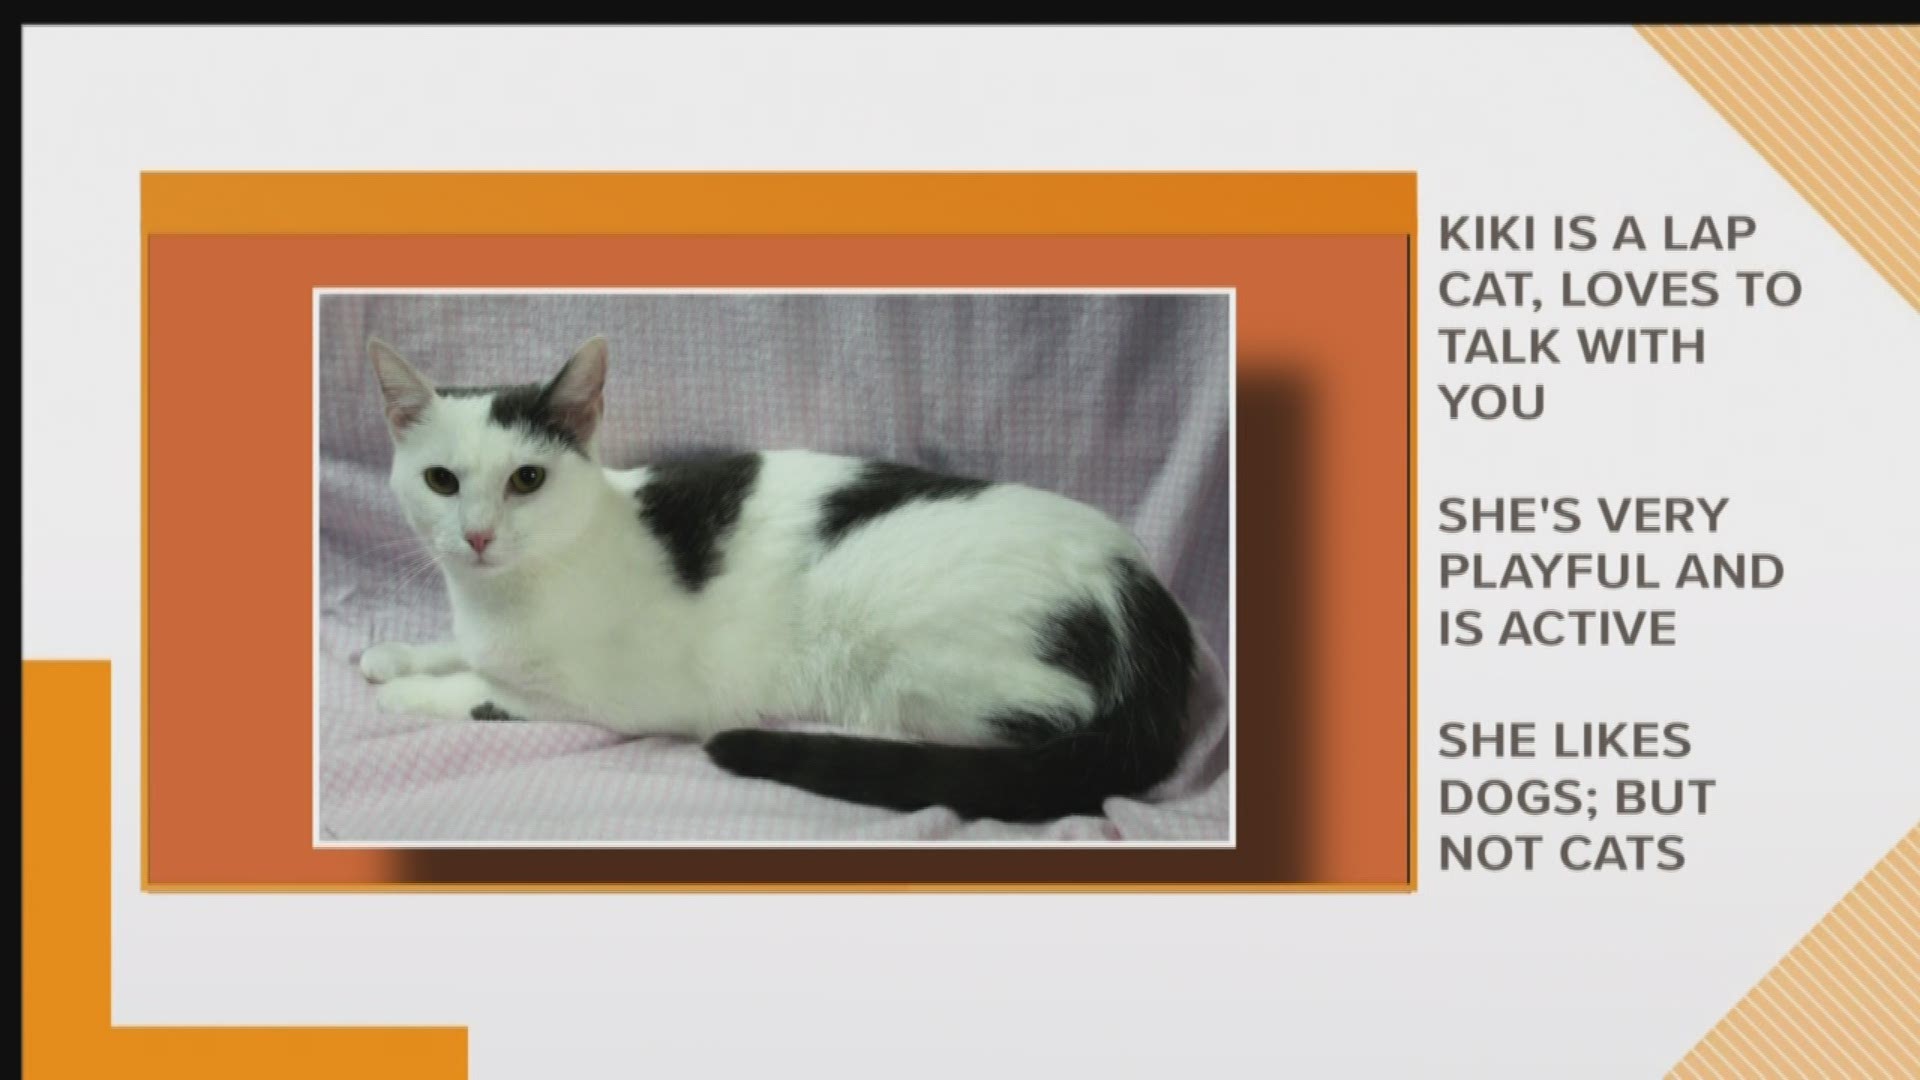 Kiki is at the Animal Awareness Society and is ready to love you!